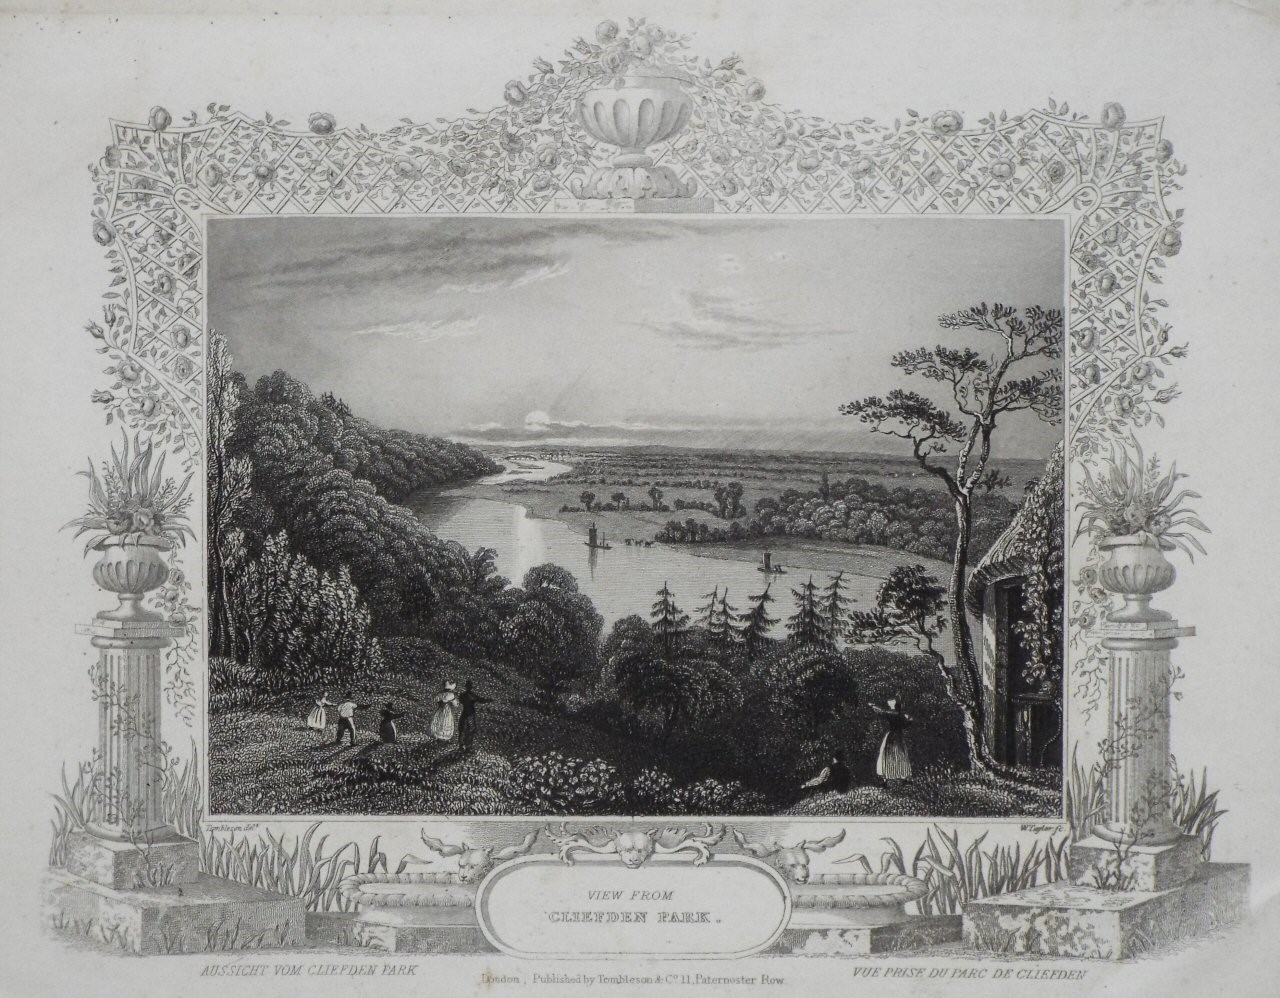 Print - View from Cliefdon Park. - Taylor